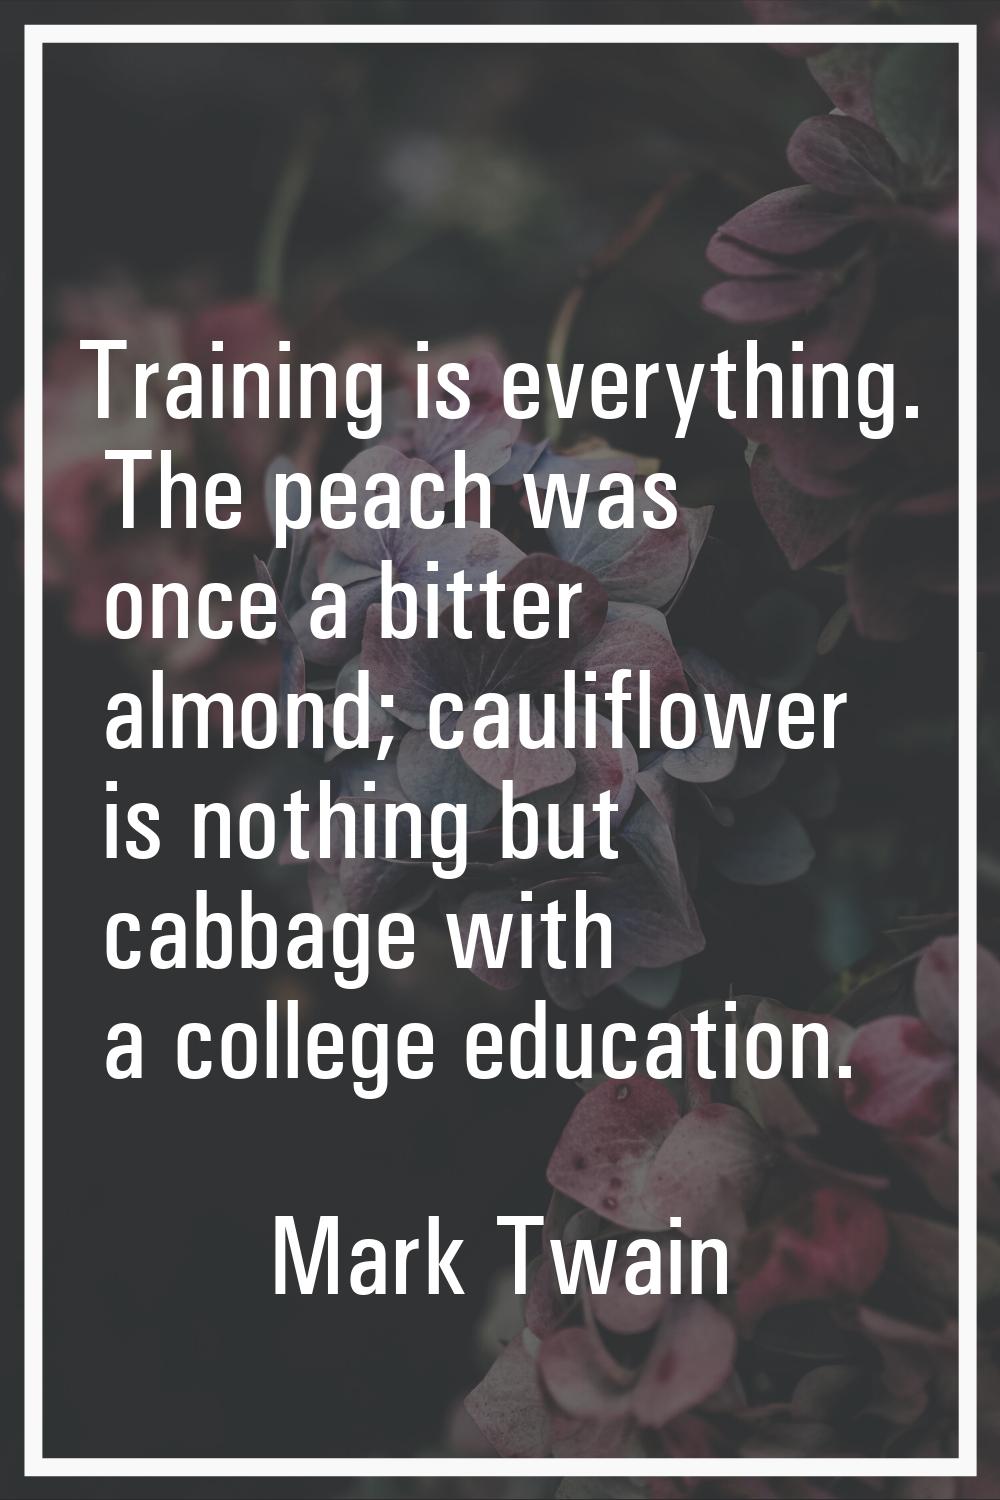 Training is everything. The peach was once a bitter almond; cauliflower is nothing but cabbage with